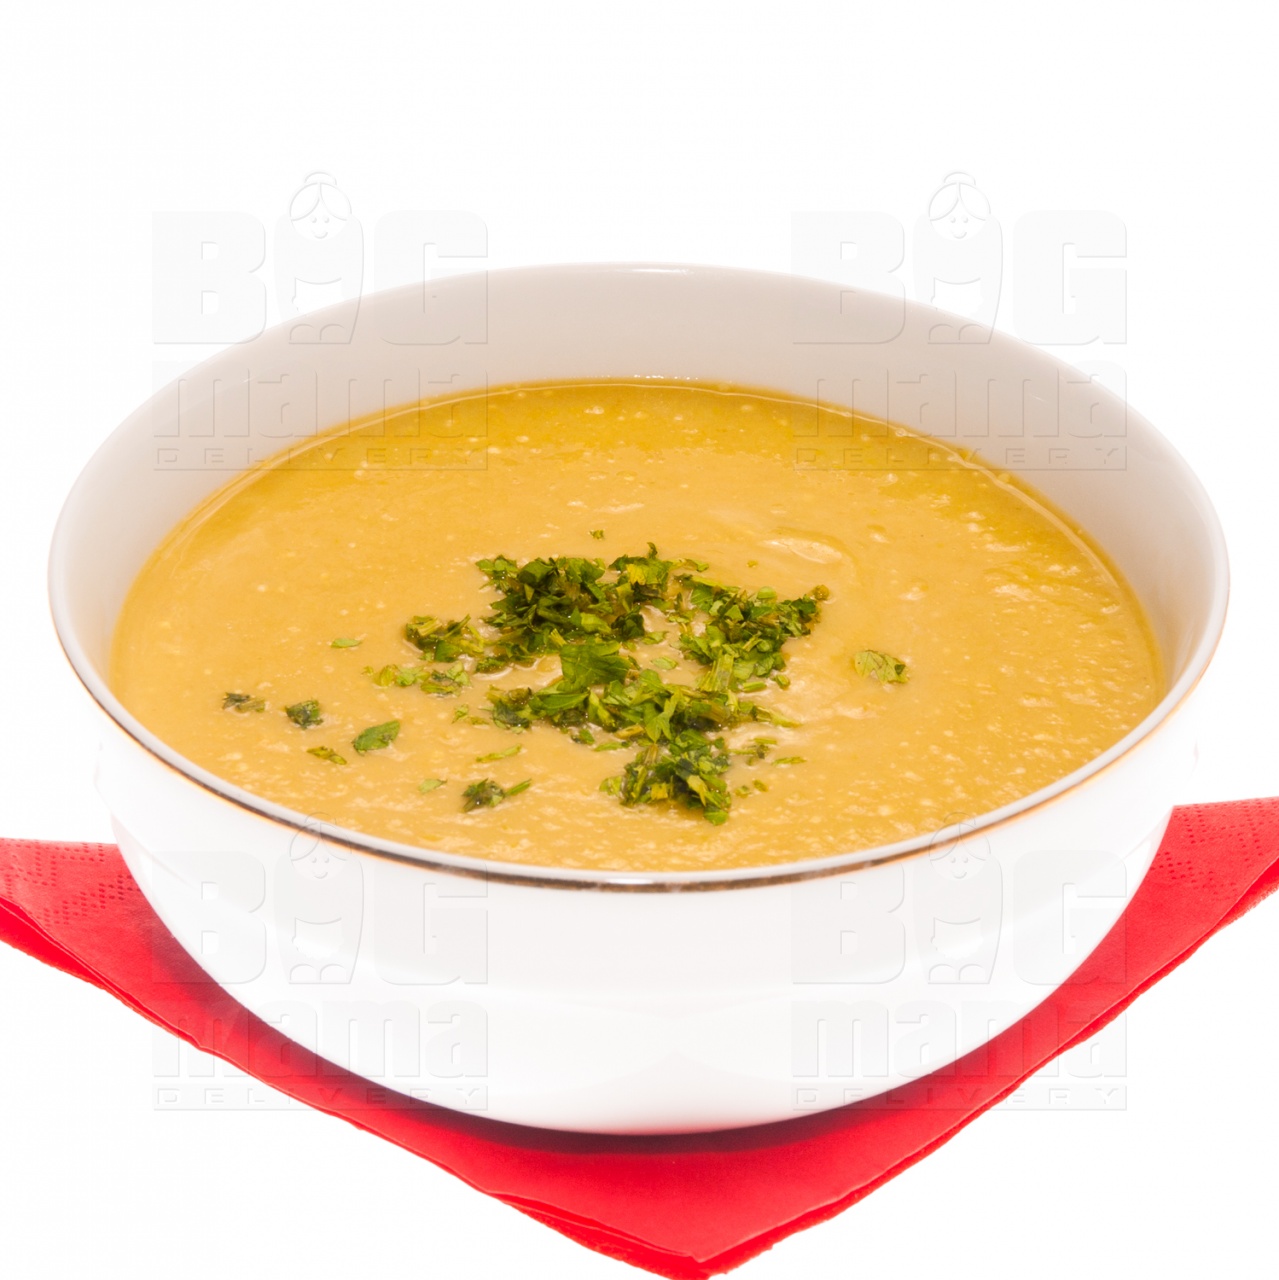 Product #132 image - Vegetable cream soup